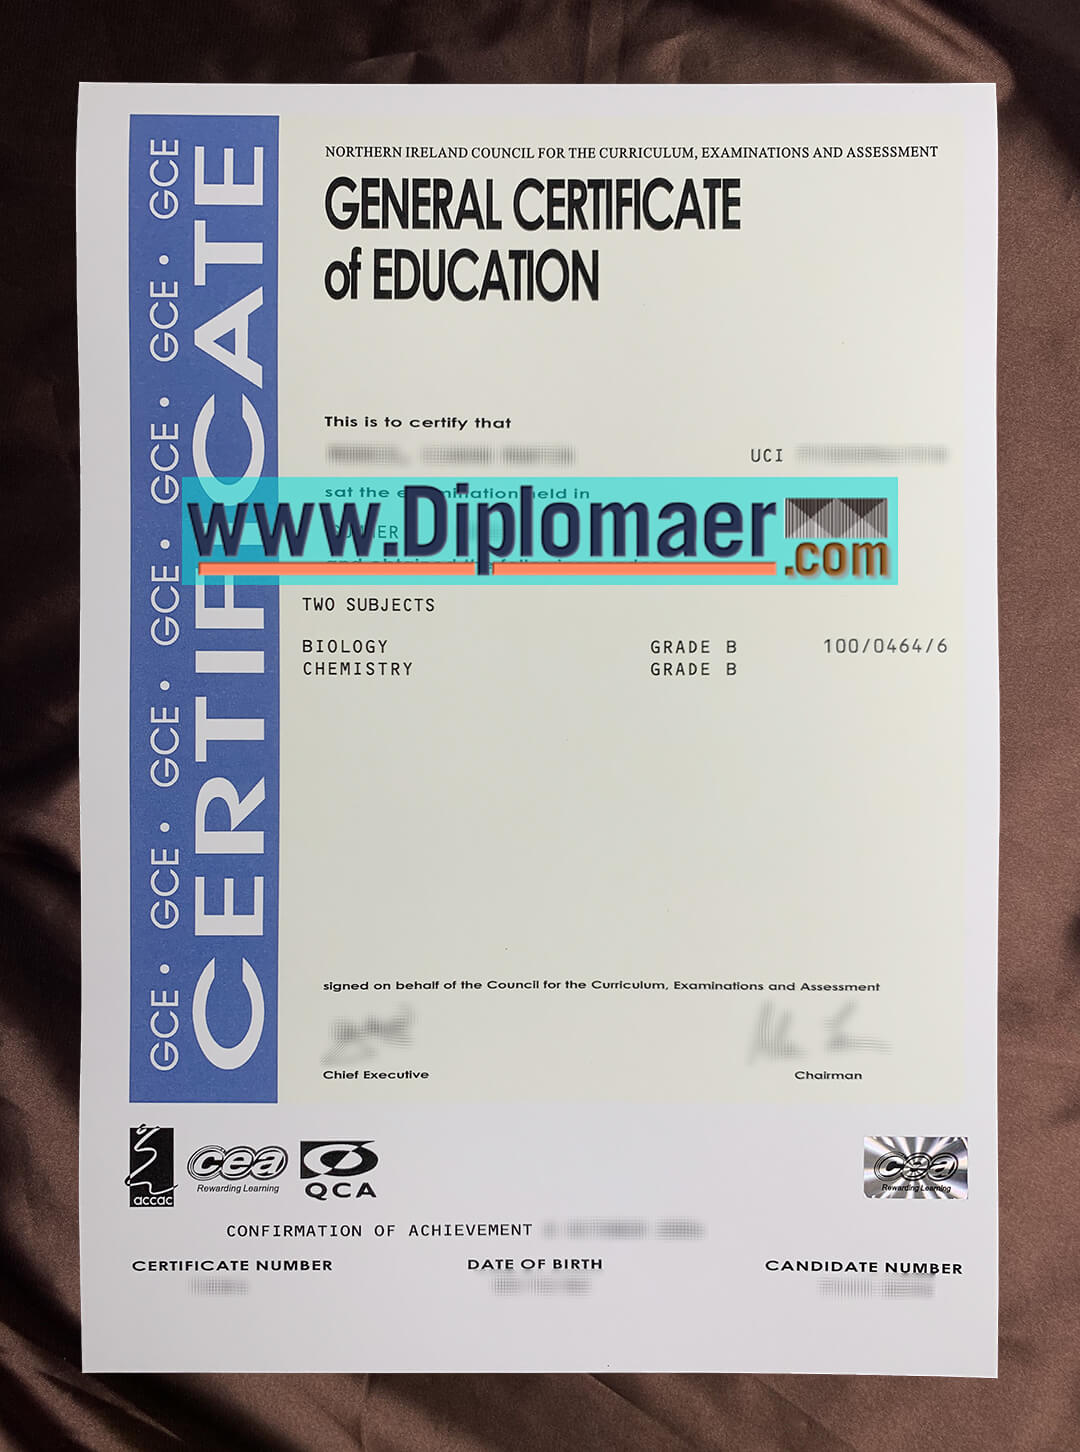 GCE fake diploma - What does the old version of the GCE certificate look like?